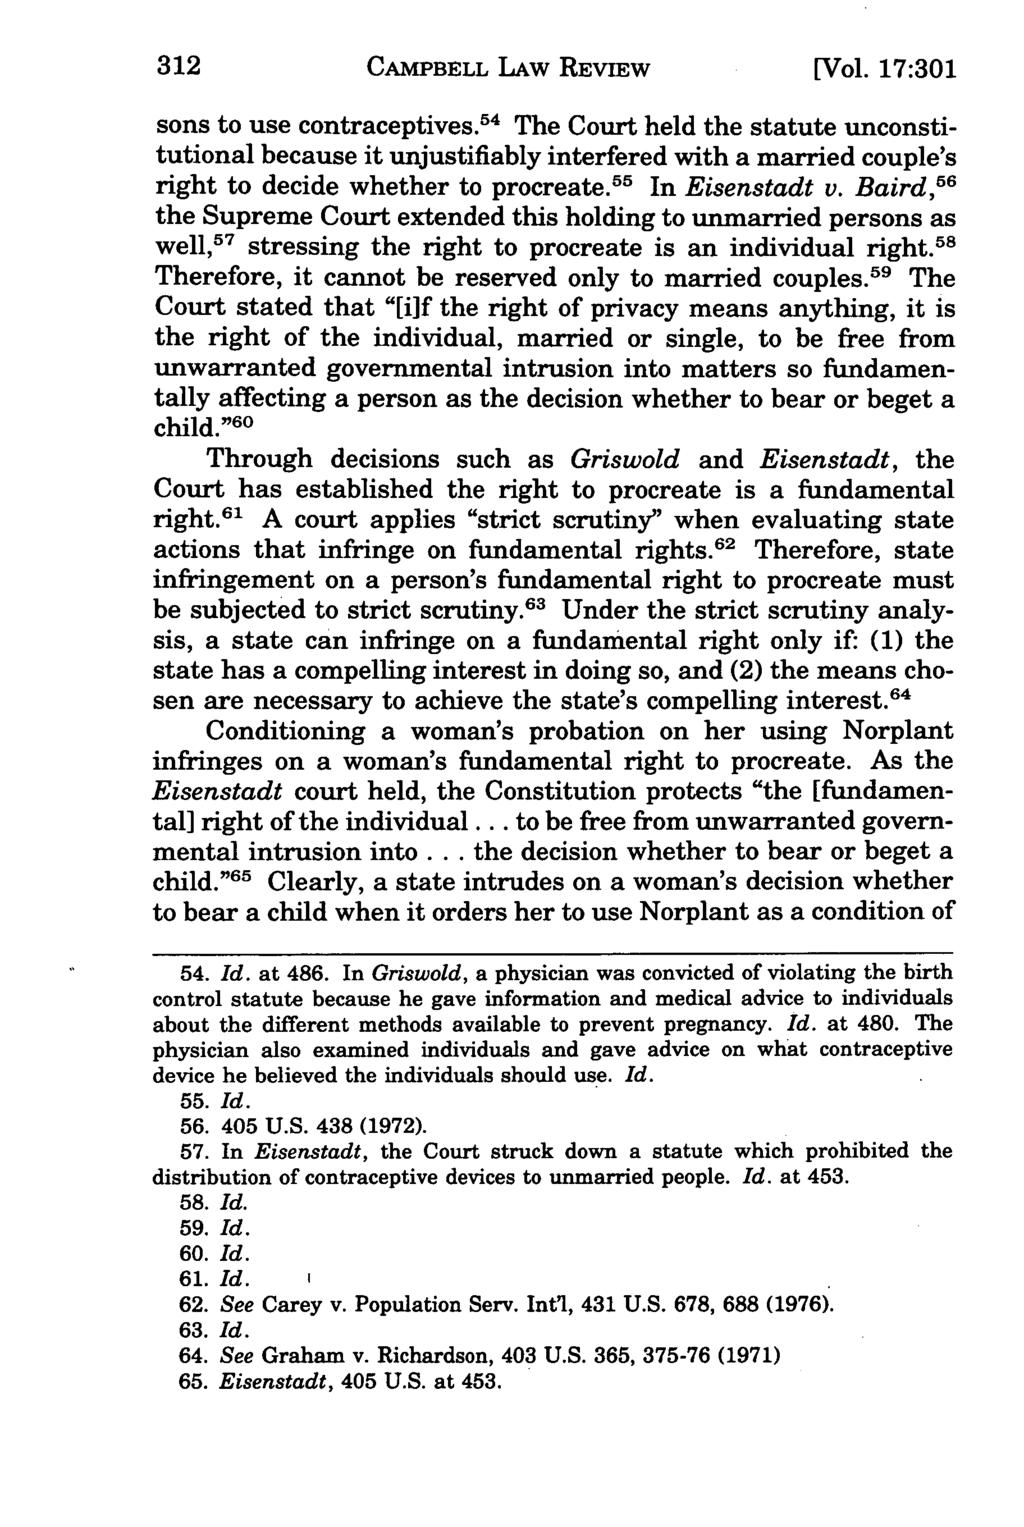 312 Campbell CAMPBELL Law Review, Vol. 17, Iss. 2 [1995], Art. 3 LAW REVIEW [Vol. 17:301 sons to use contraceptives.